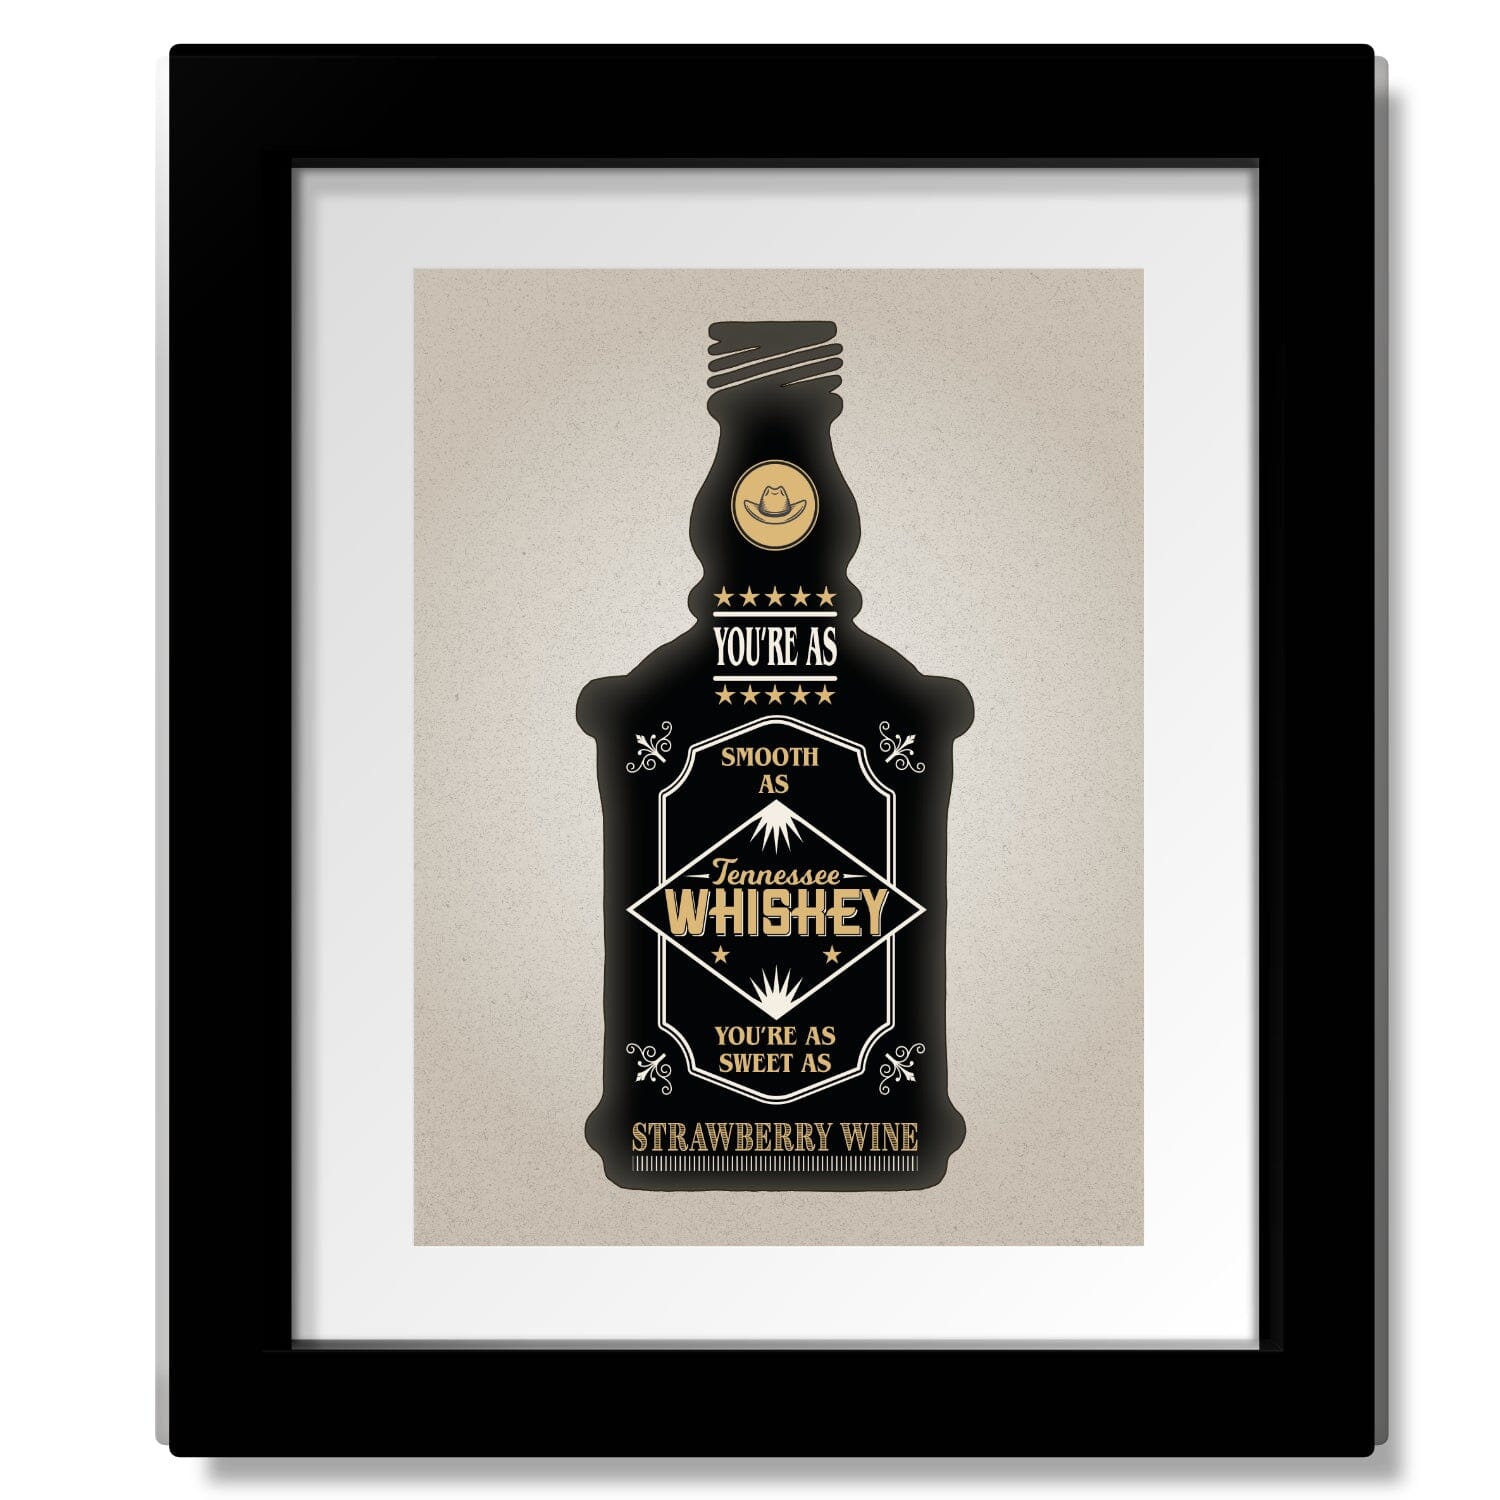 Tennessee Whiskey by Chris Stapleton - Song Lyric Poster Art Song Lyrics Art Song Lyrics Art 11x14 Framed and Matted Print 